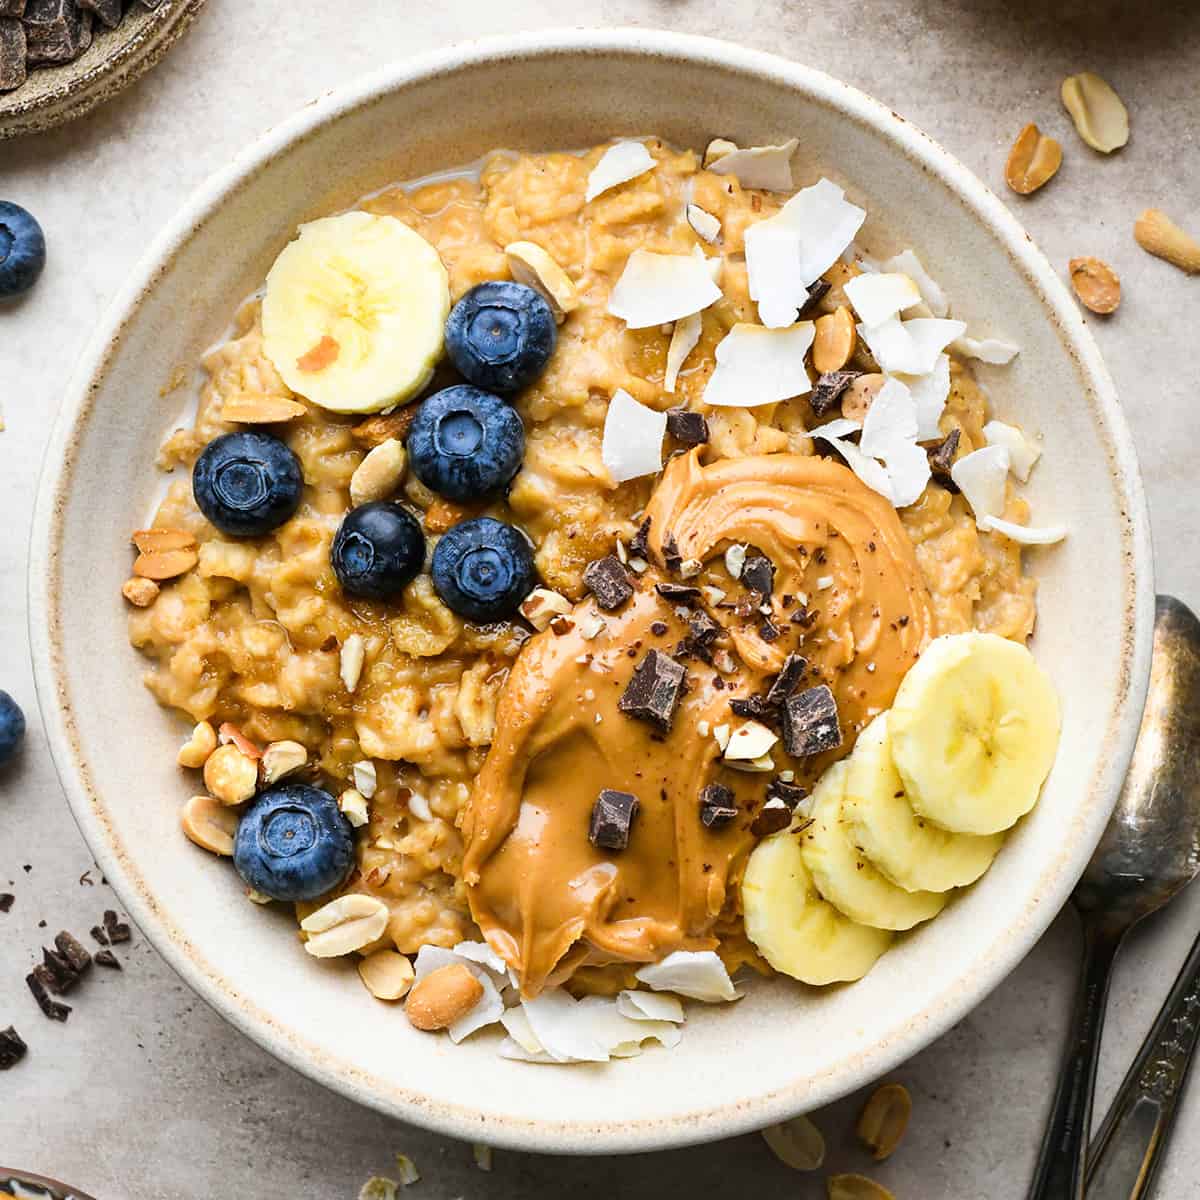 a bowl of Peanut Butter Oatmeal topped with blueberries, bananas, peanut butter, chocolate and coconut